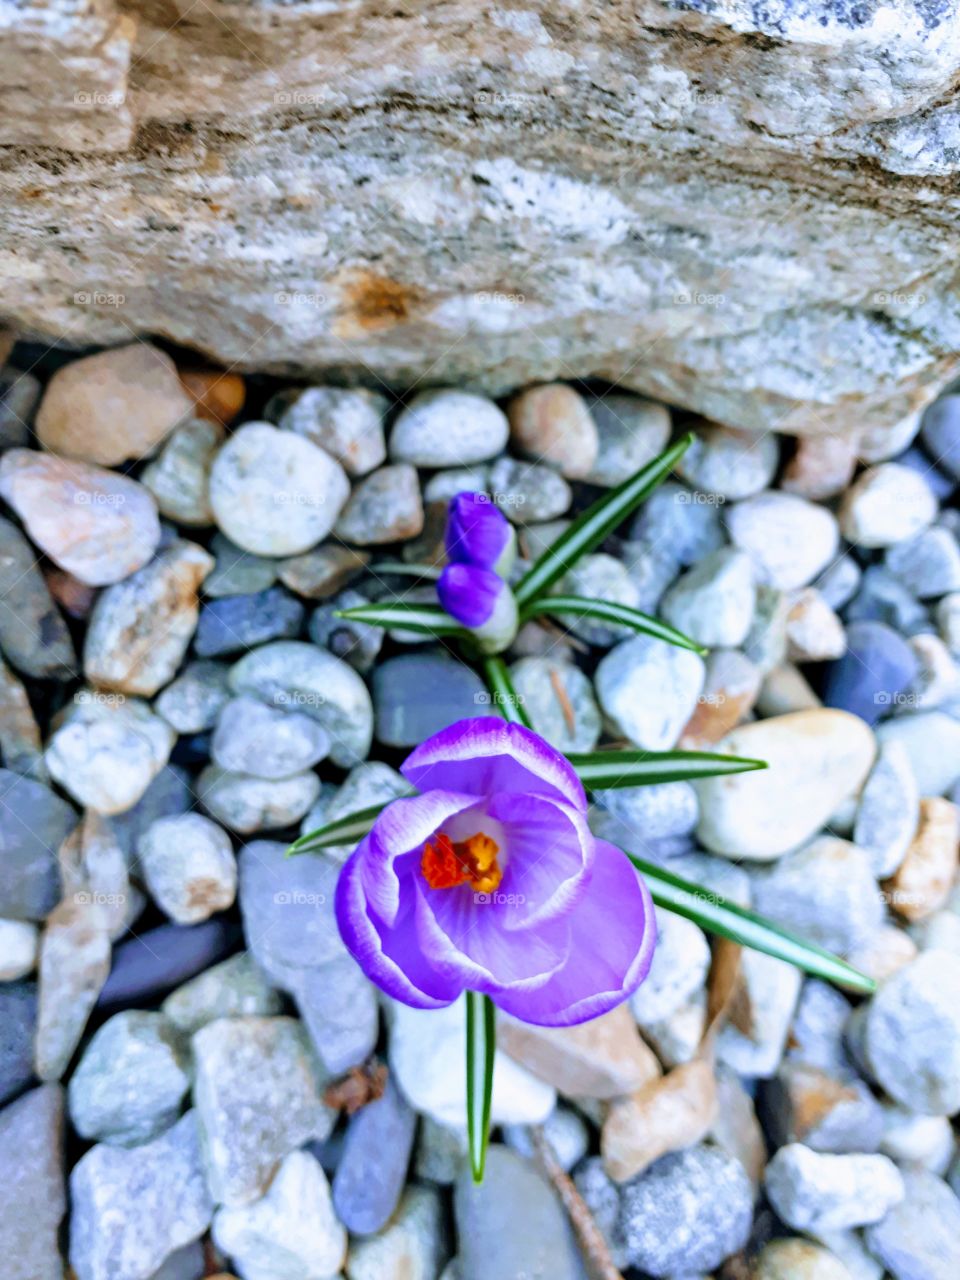 A crocus pushing through adversity to bloom to perfection, its family proudly following suit.